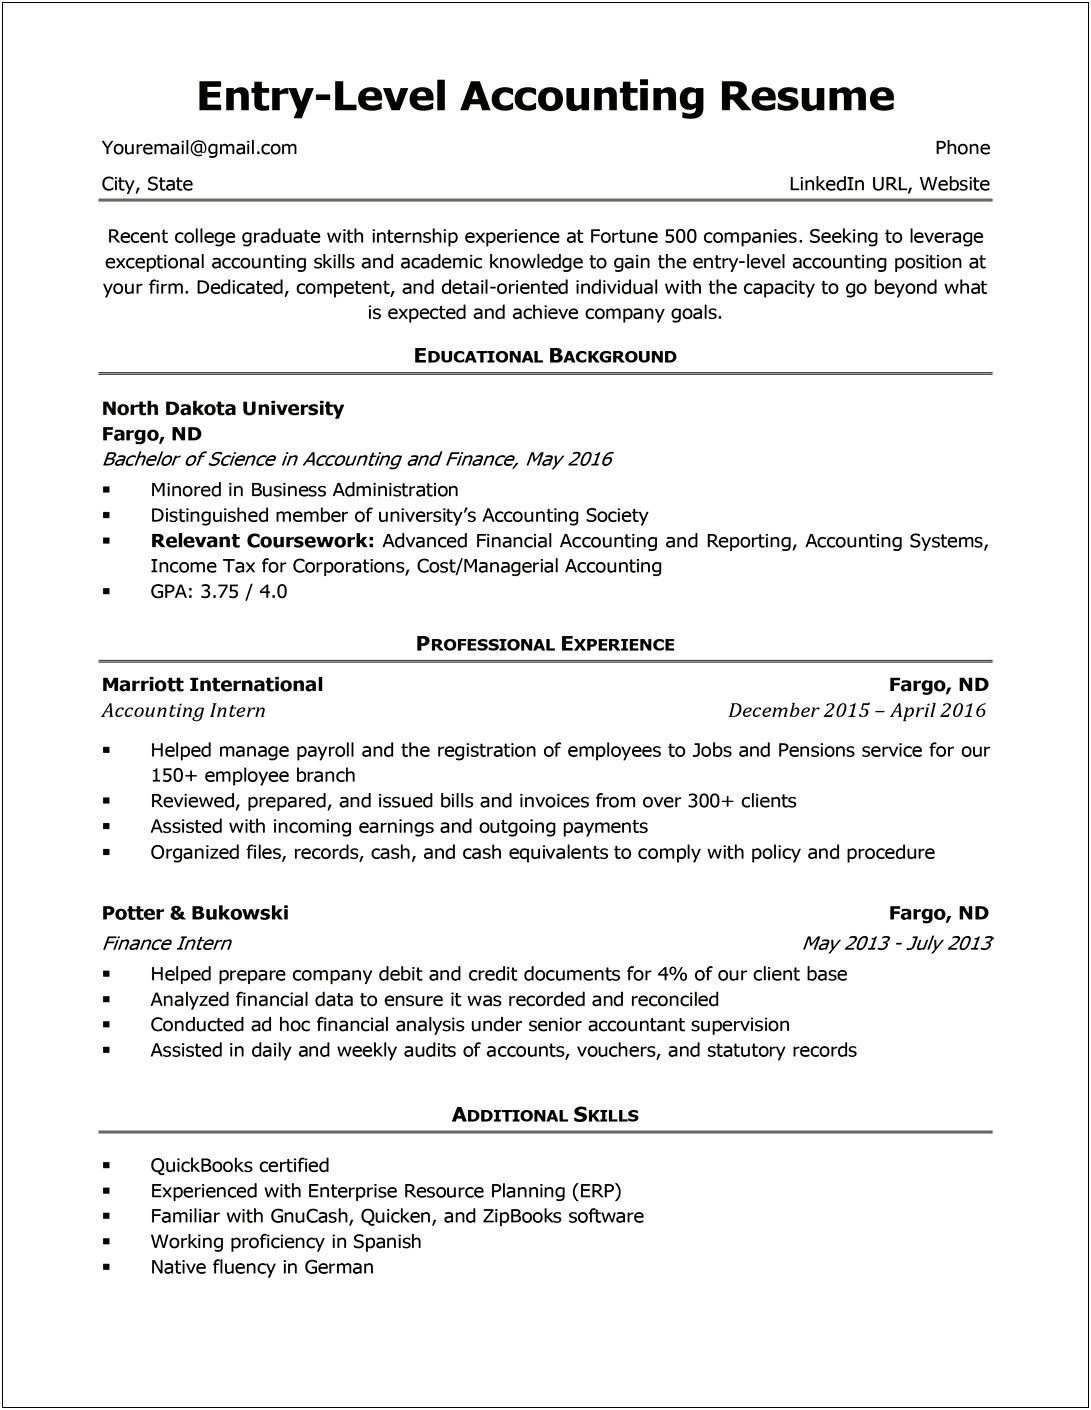 Making A Resume With Little Experience Summary Statement